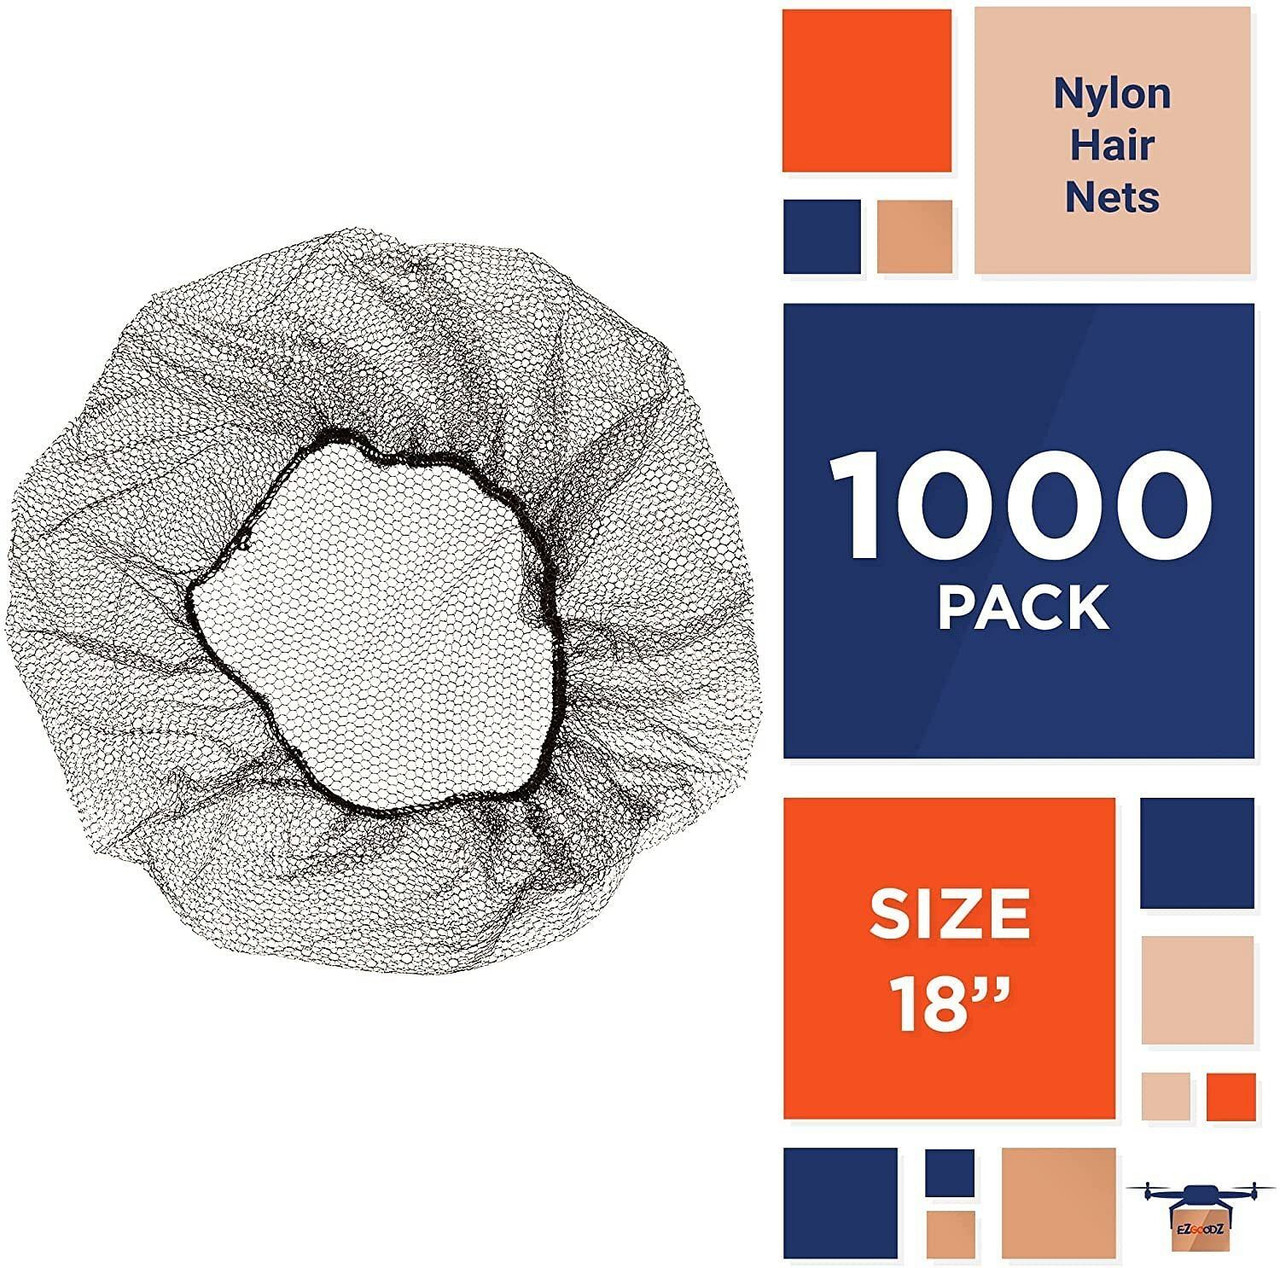 Blue Nylon Hair Nets 18". Pack of 1000 Disposable Head Caps with Elastic Edge Mesh. Stretchable Adu